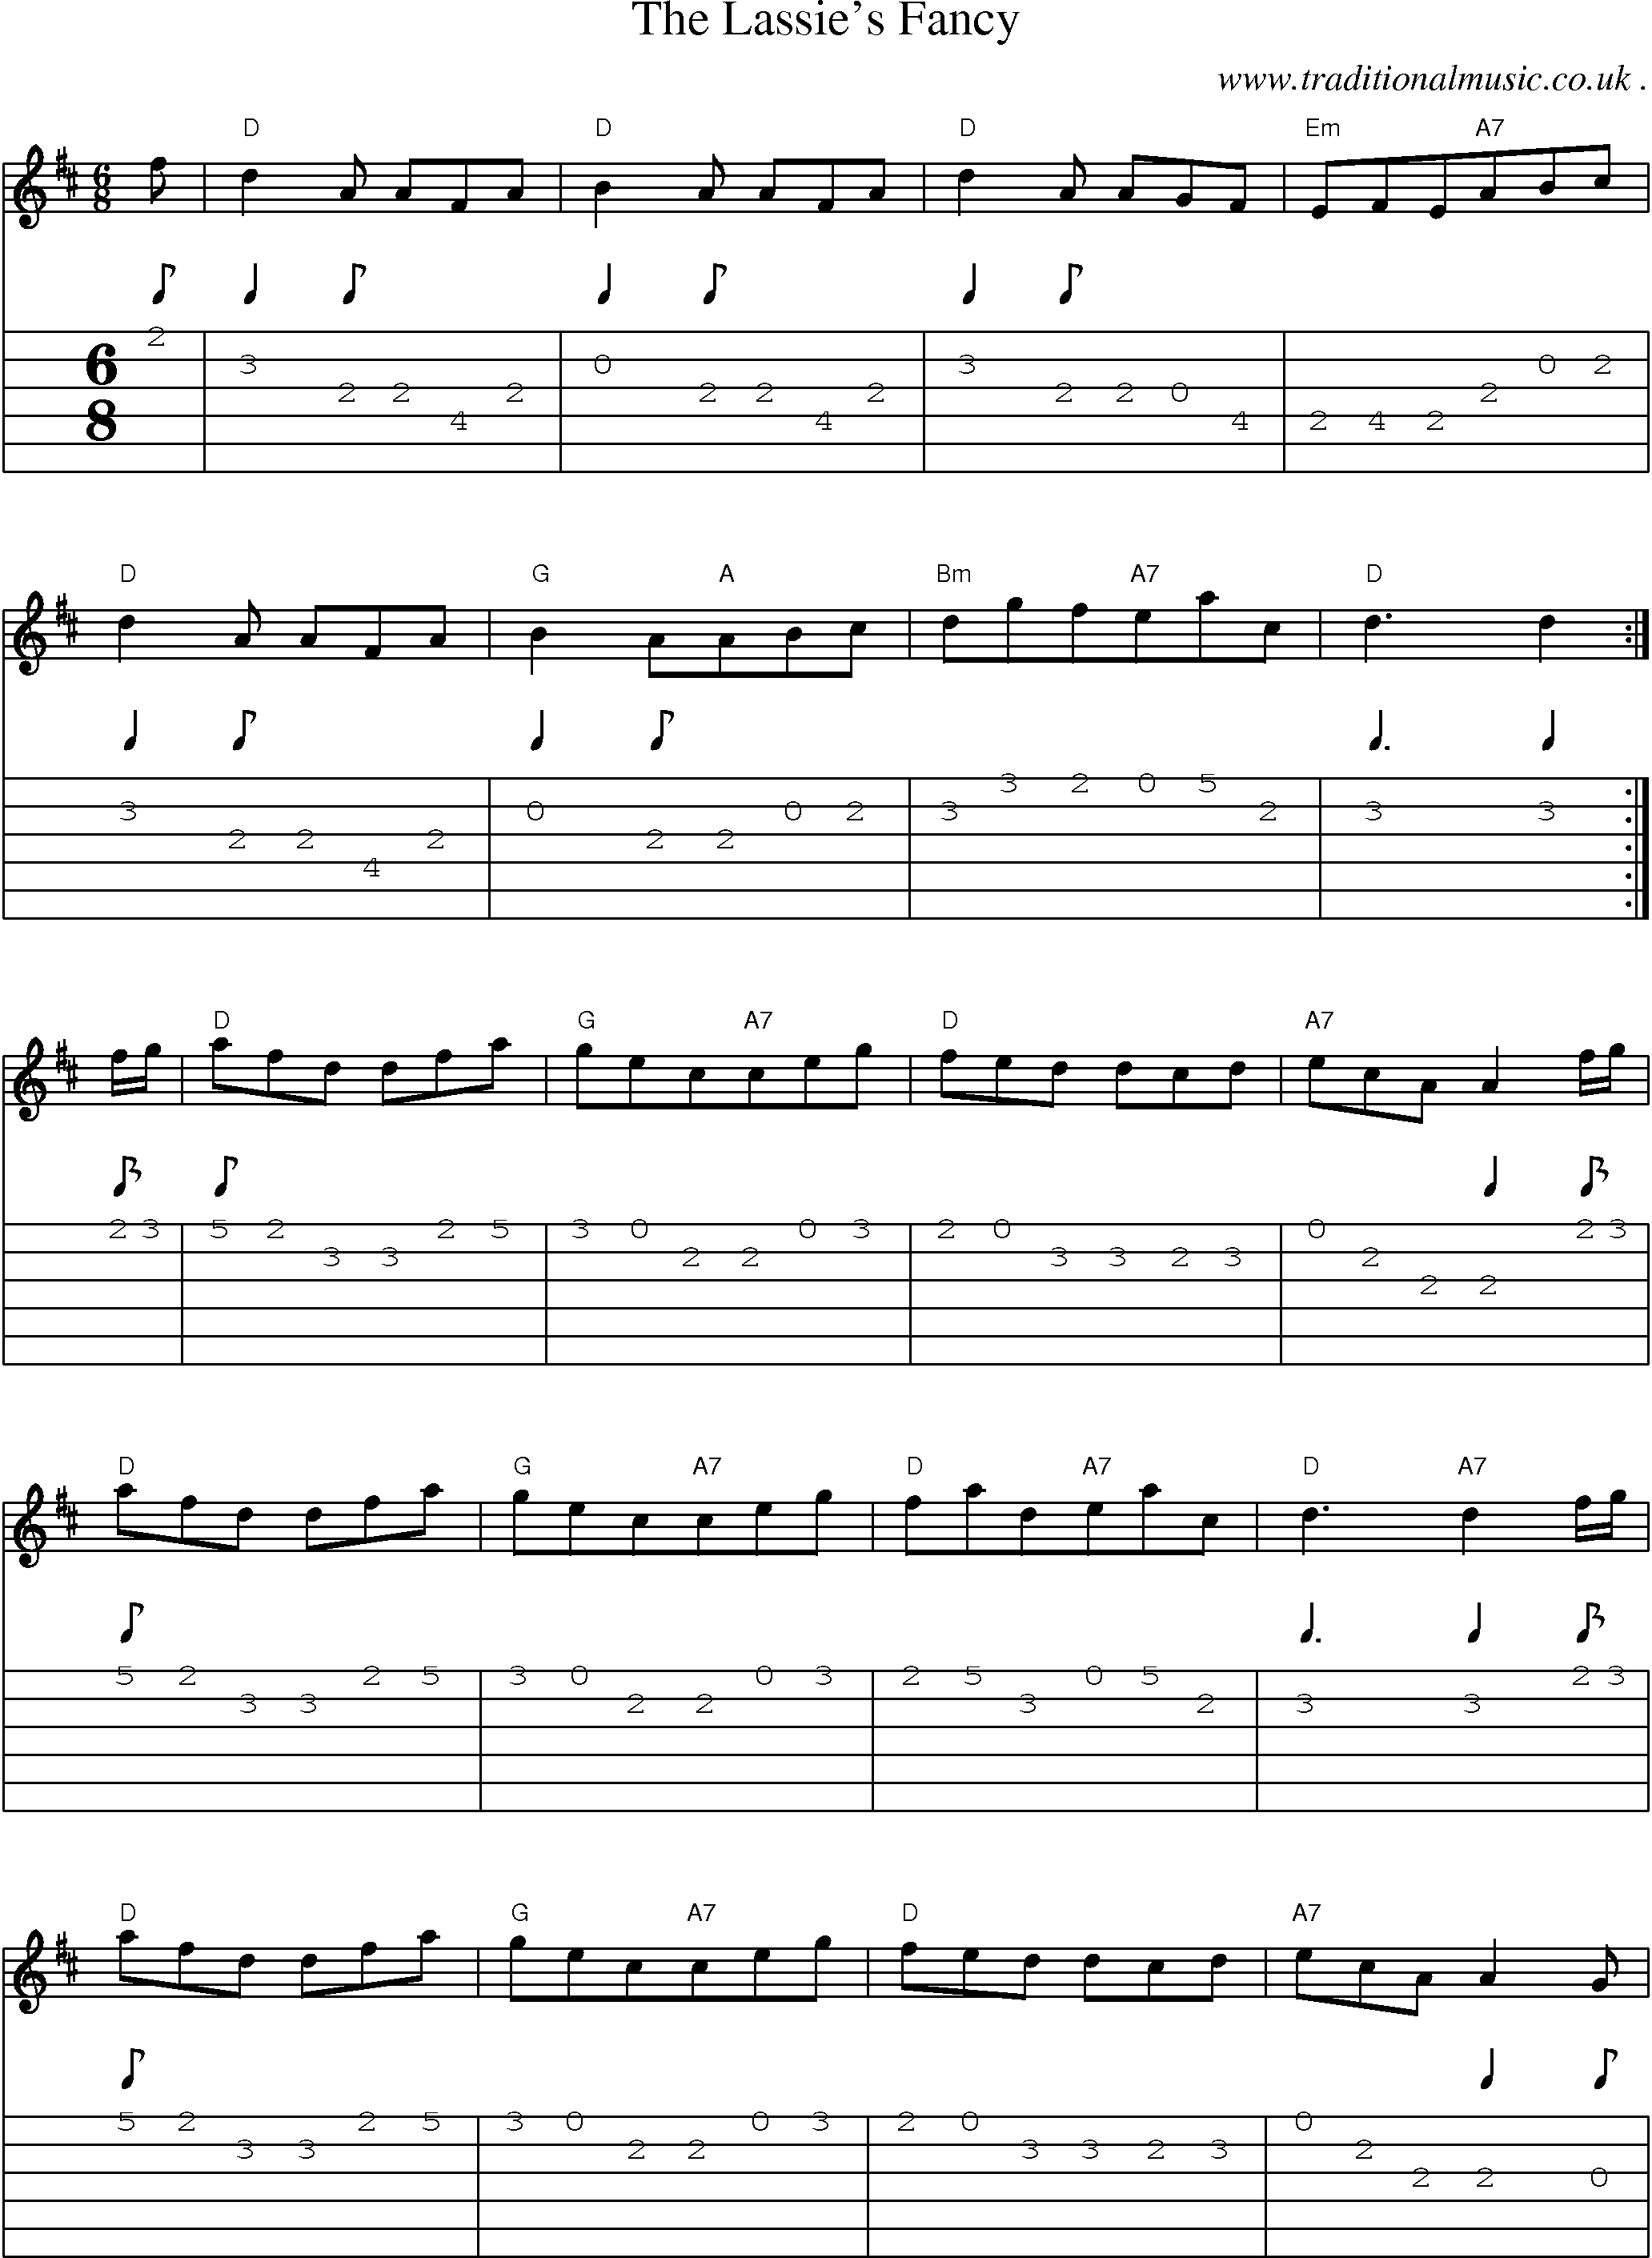 Sheet-Music and Guitar Tabs for The Lassies Fancy